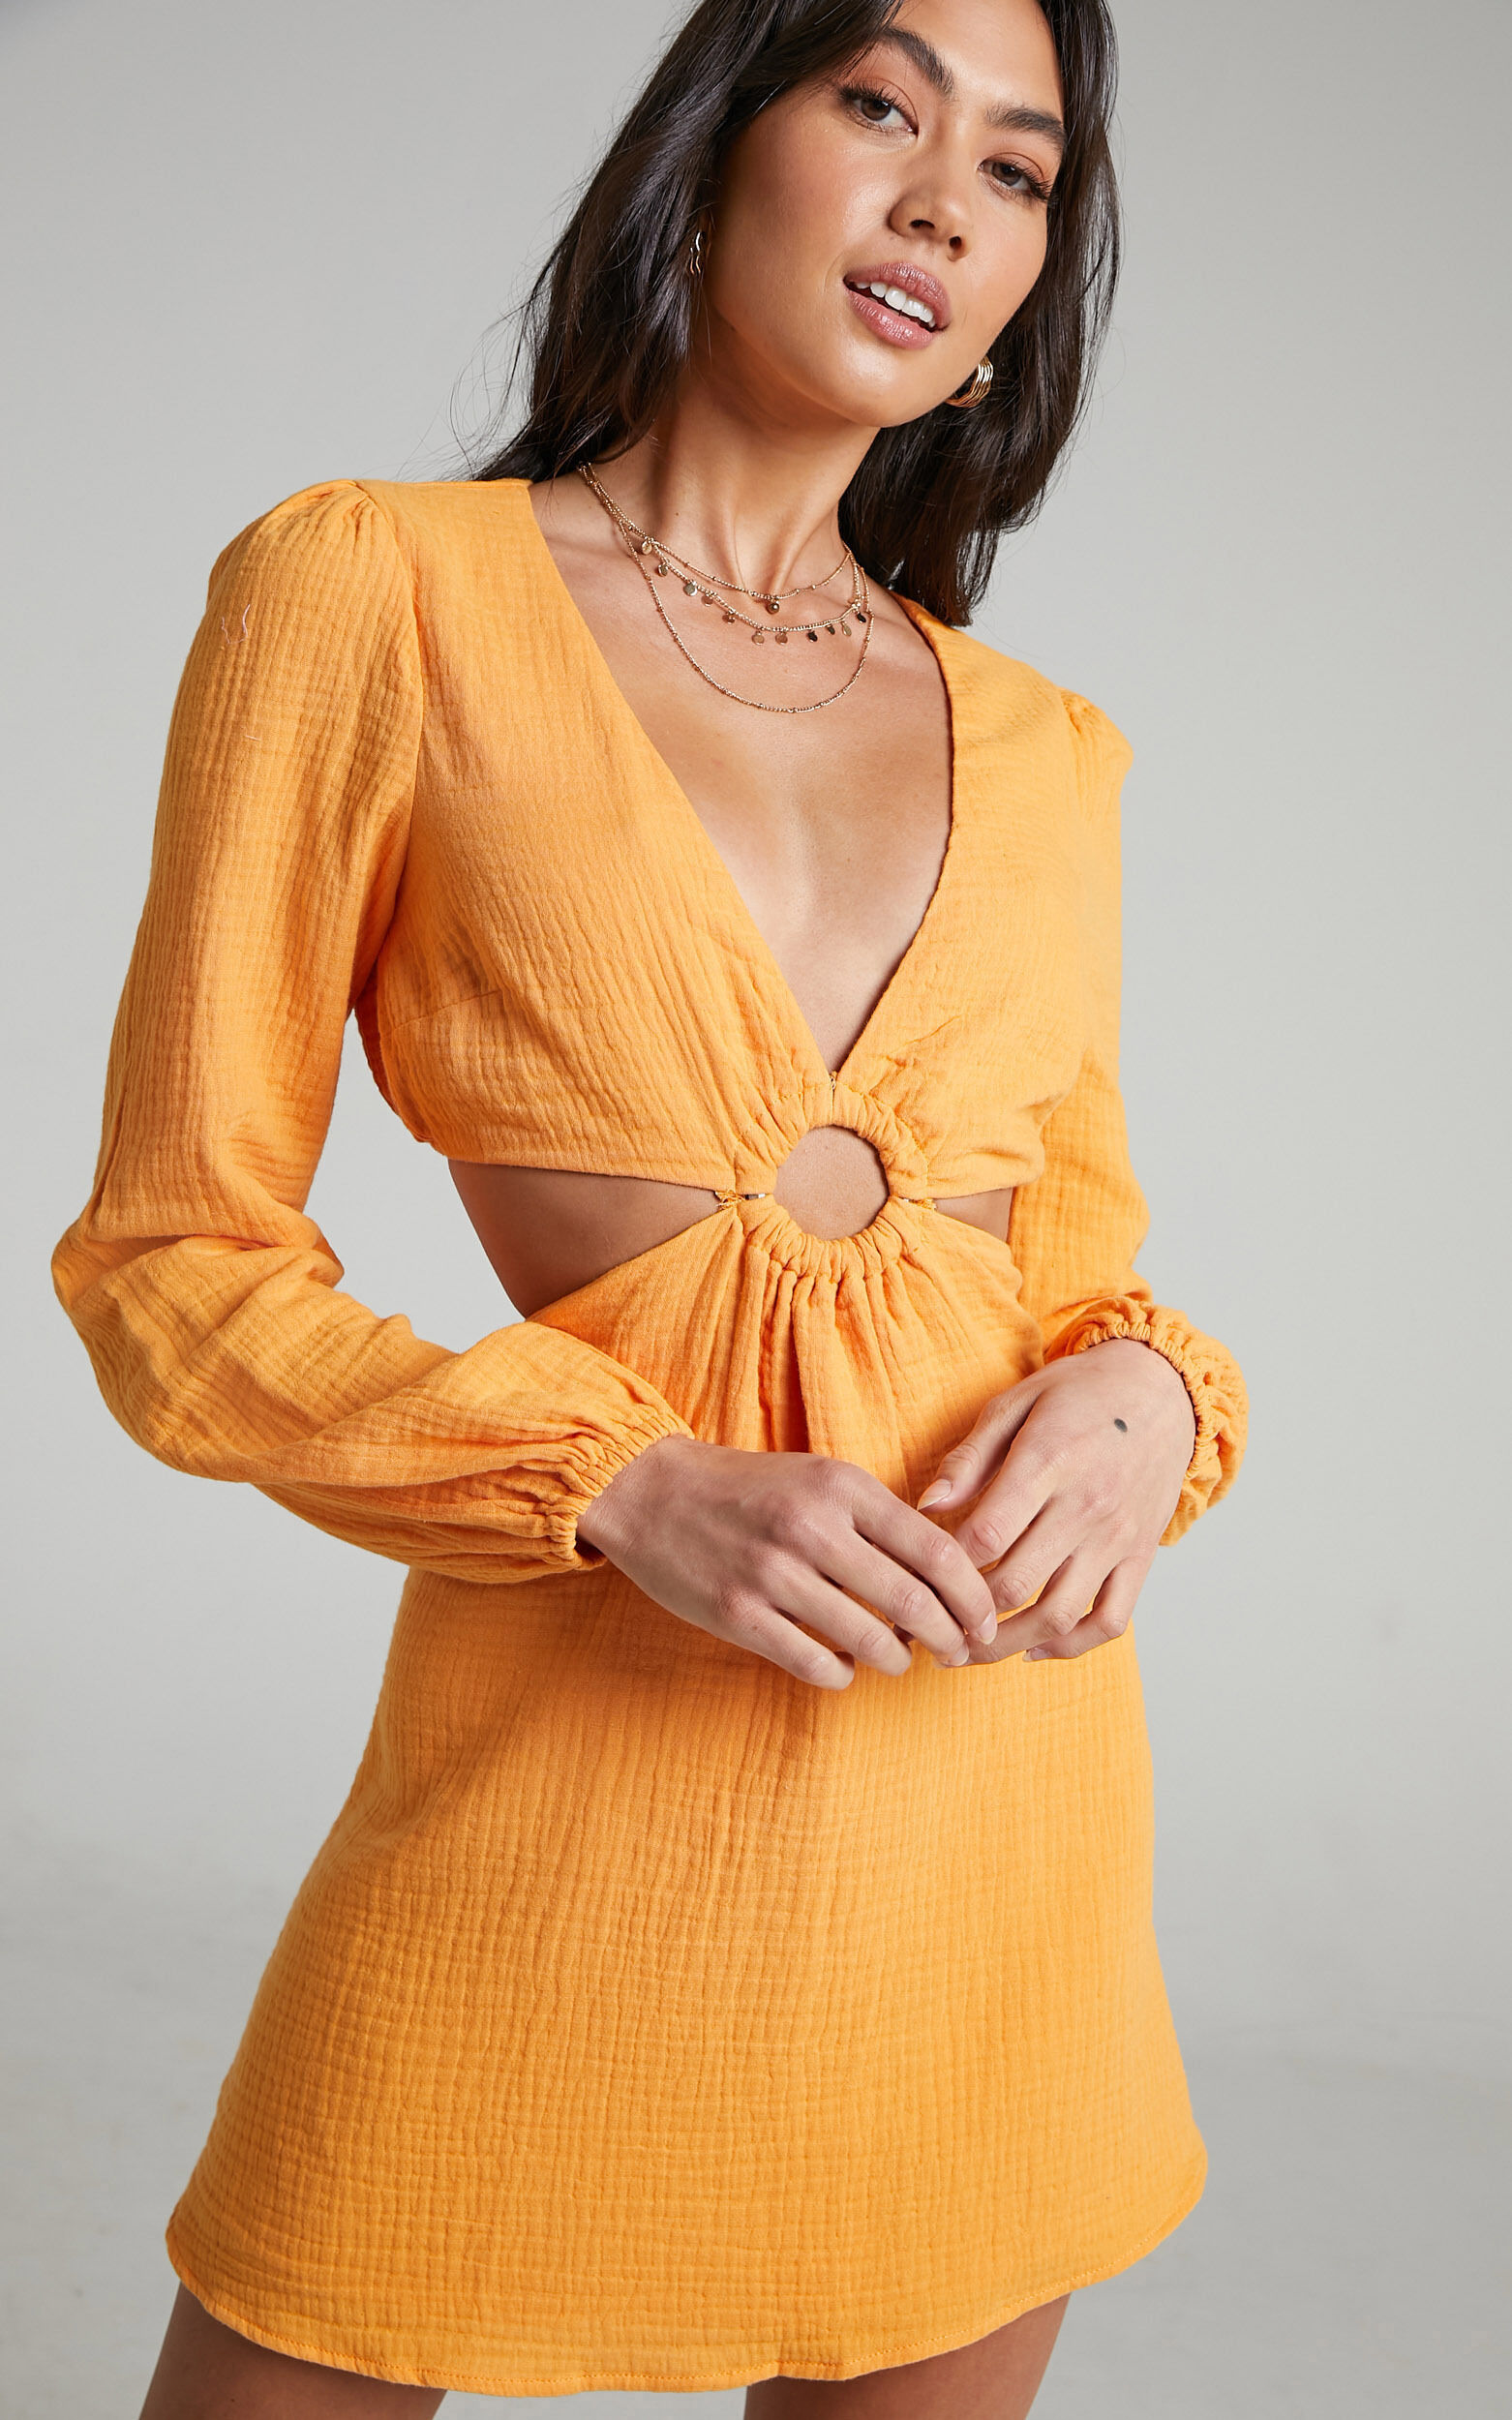 Queeny Side Cutouts Mini Dress in Sherbet - 06, ORG3, super-hi-res image number null